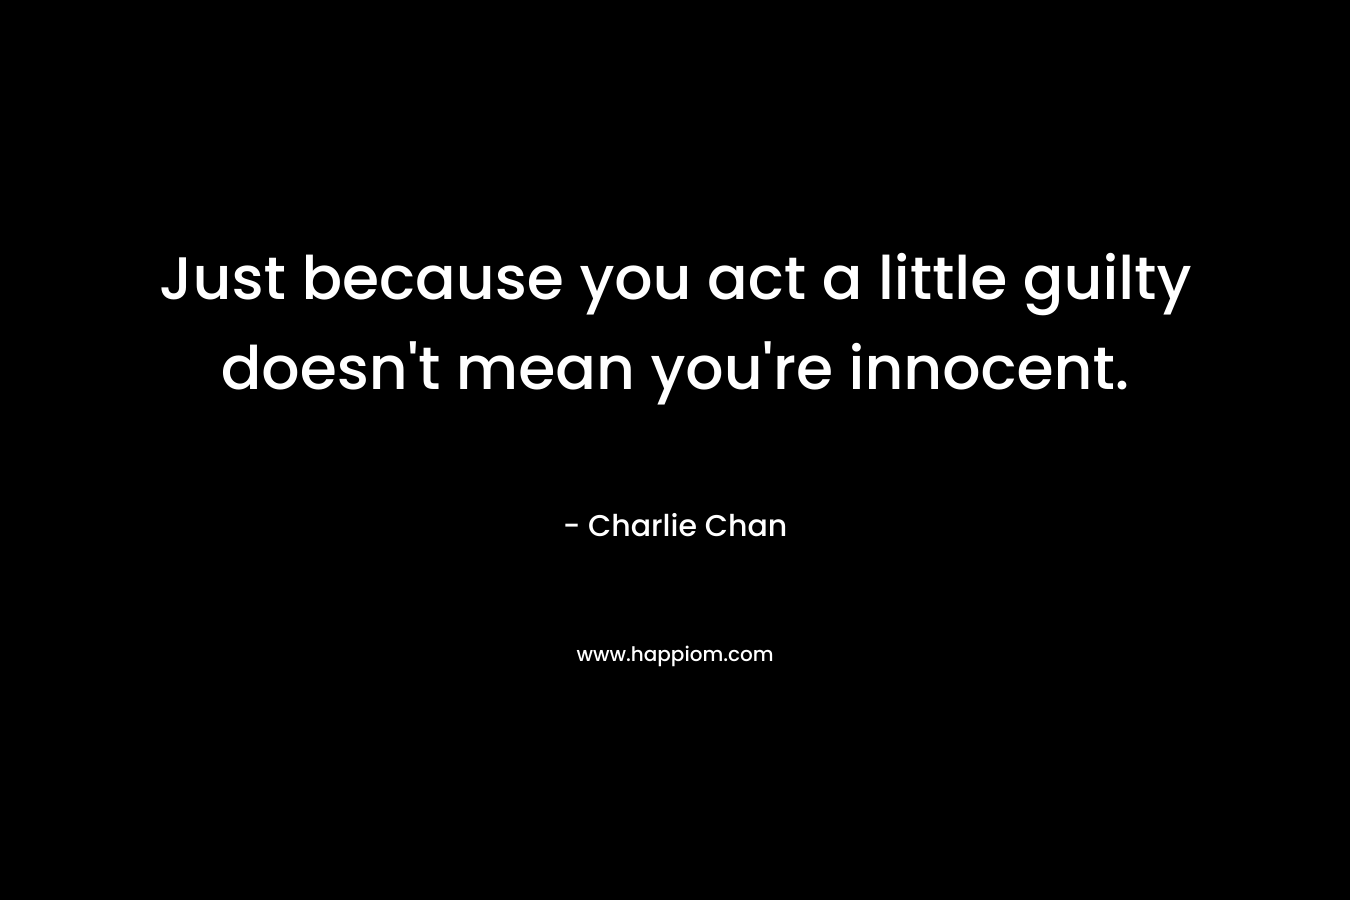 Just because you act a little guilty doesn’t mean you’re innocent. – Charlie Chan